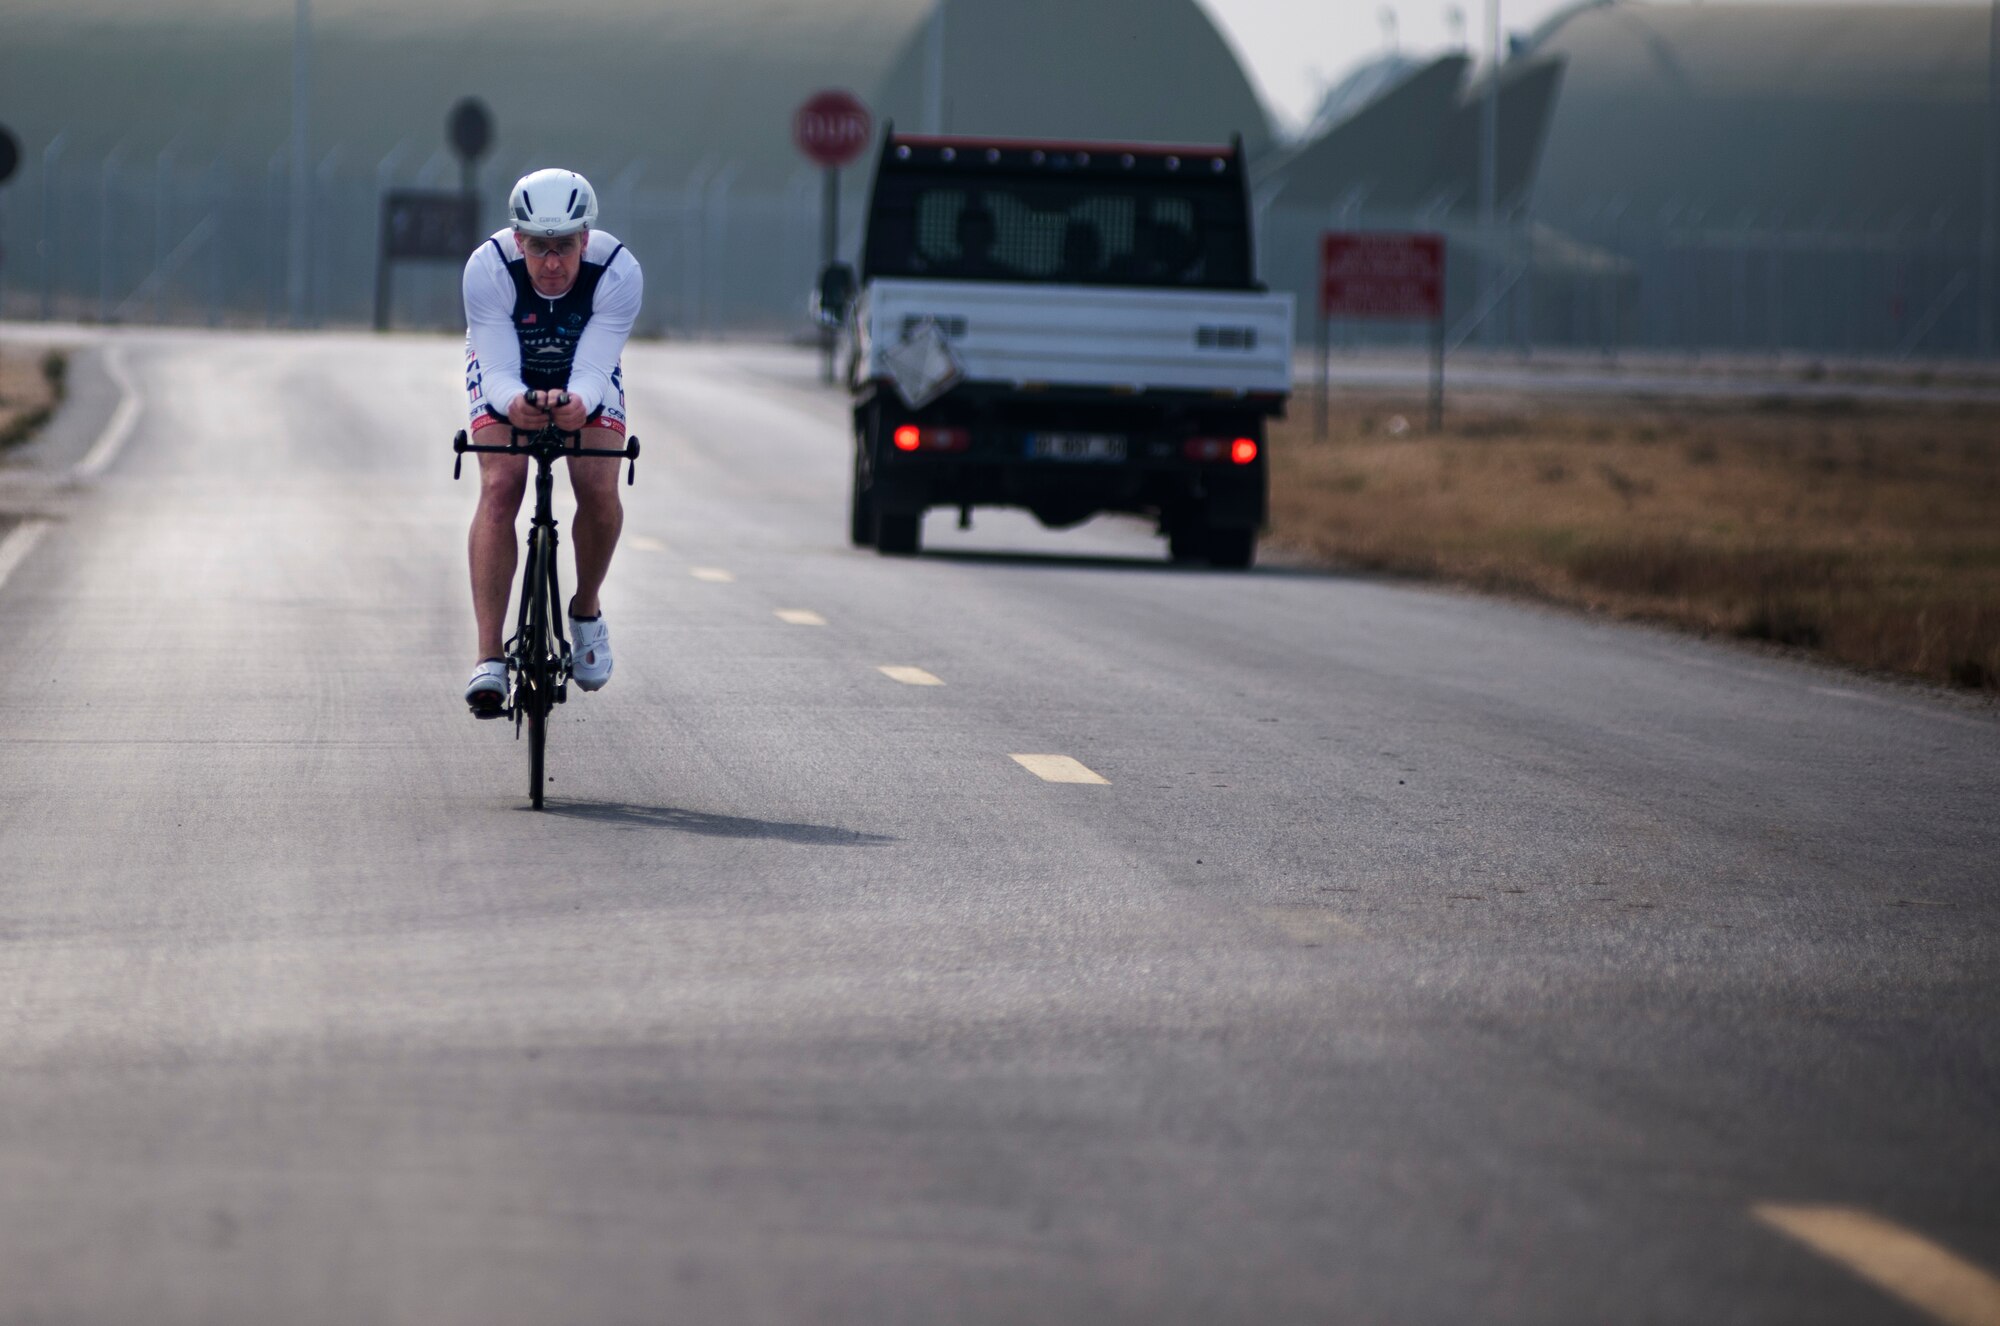 U.S. Air Force Senior Master Sgt. Jason Chiasson, 39th Communications Squadron production superintendent, rides around the flightline Dec. 10, 2015, at Incirlik Air Base, Turkey. Chiasson rode 25 miles on his lunch break as part of his training program for the Air Force Cycling Team. (U.S. Air Force photo by Senior Airman Krystal Ardrey/Released)